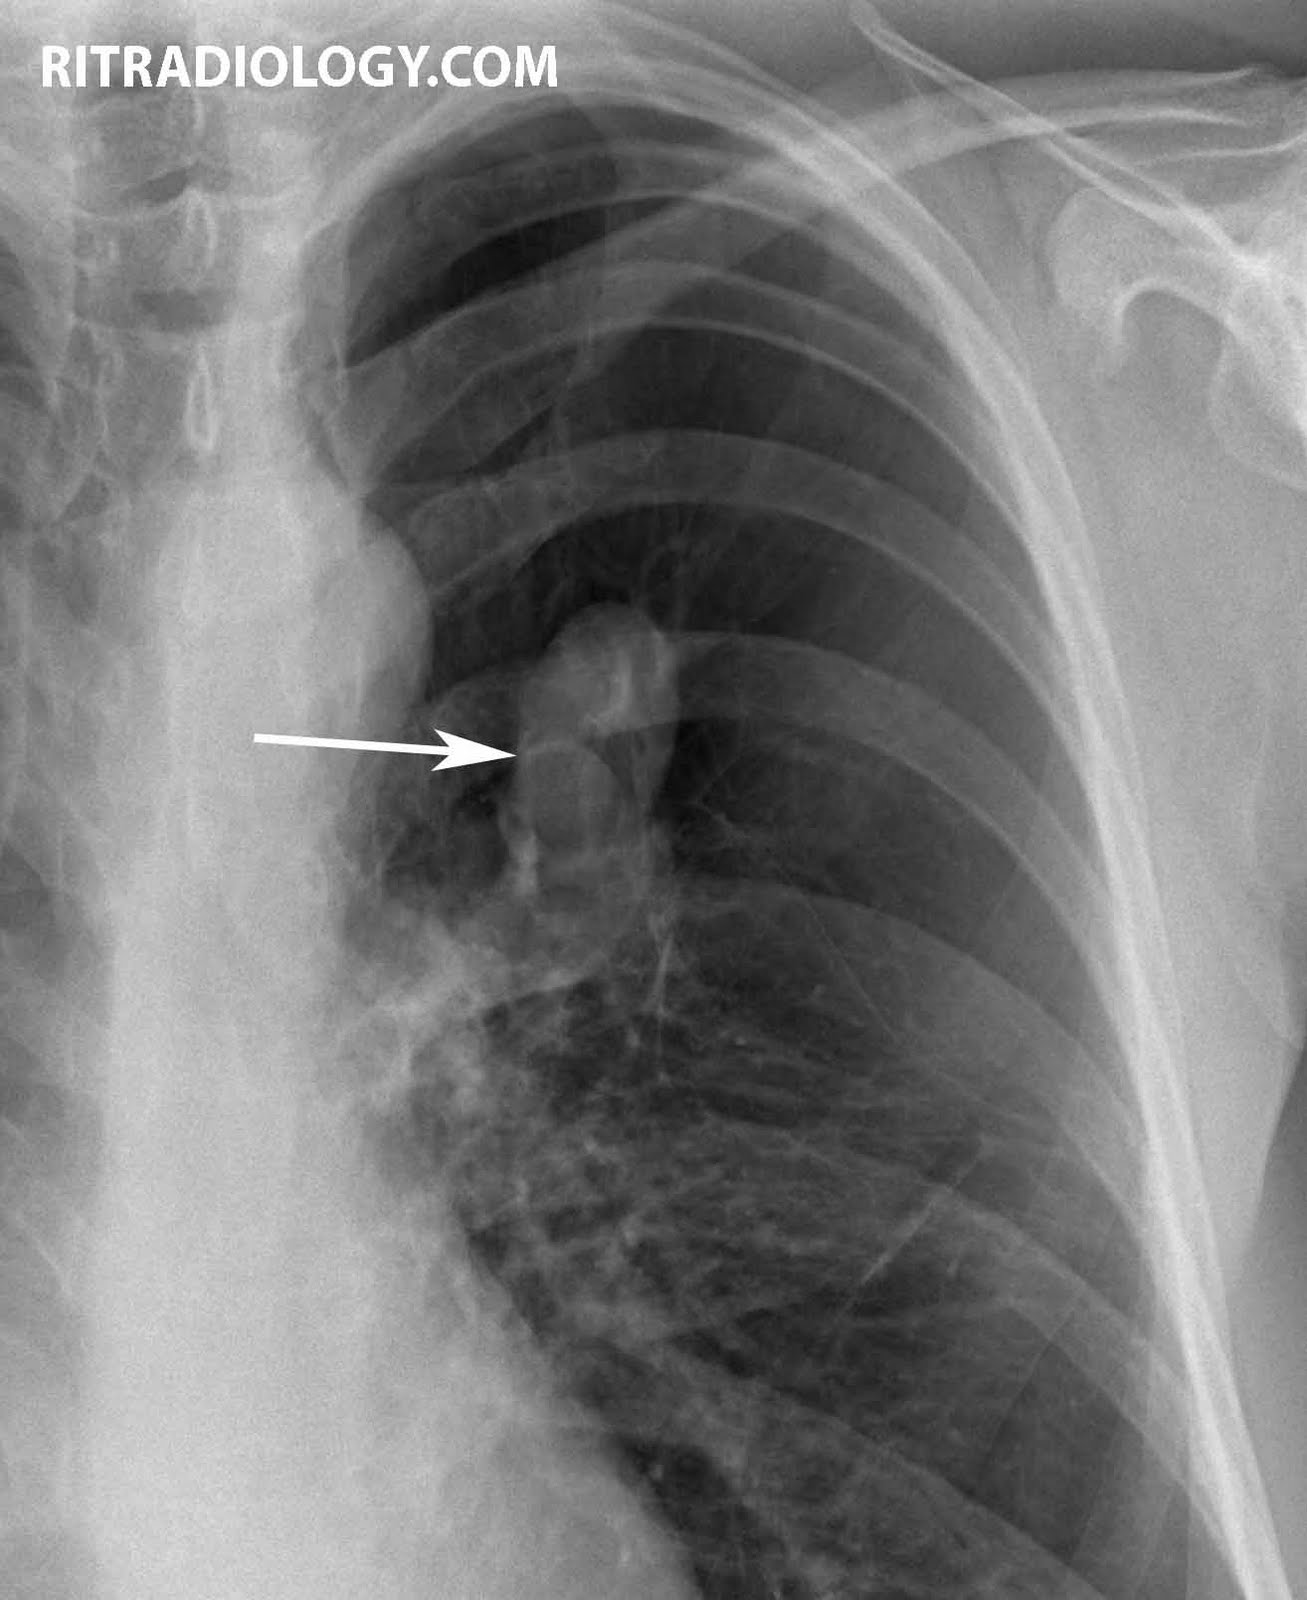 Bronchial Obstruction